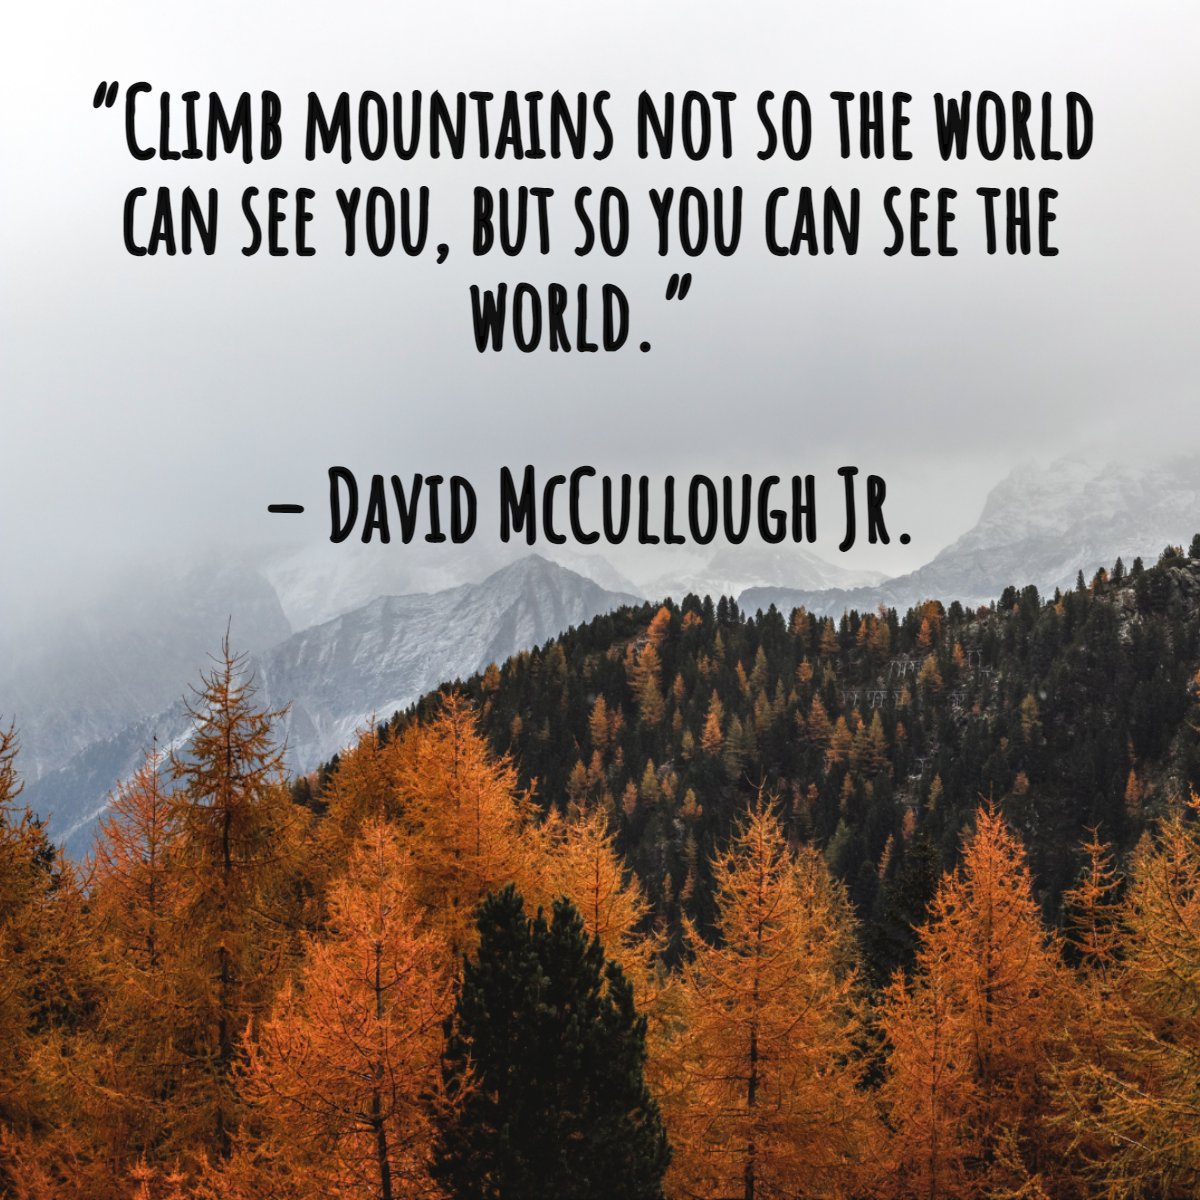 “Climb mountains not so the world can see you, but so you can see the world.”
― David McCullough Jr.

#Motivation #MotivationalQuote #QuoteoftheDay
 #RealestateAppleton #Appletonwisconsin #AppletonWisconsinRealEstate #CharlesRobbinsRealtor